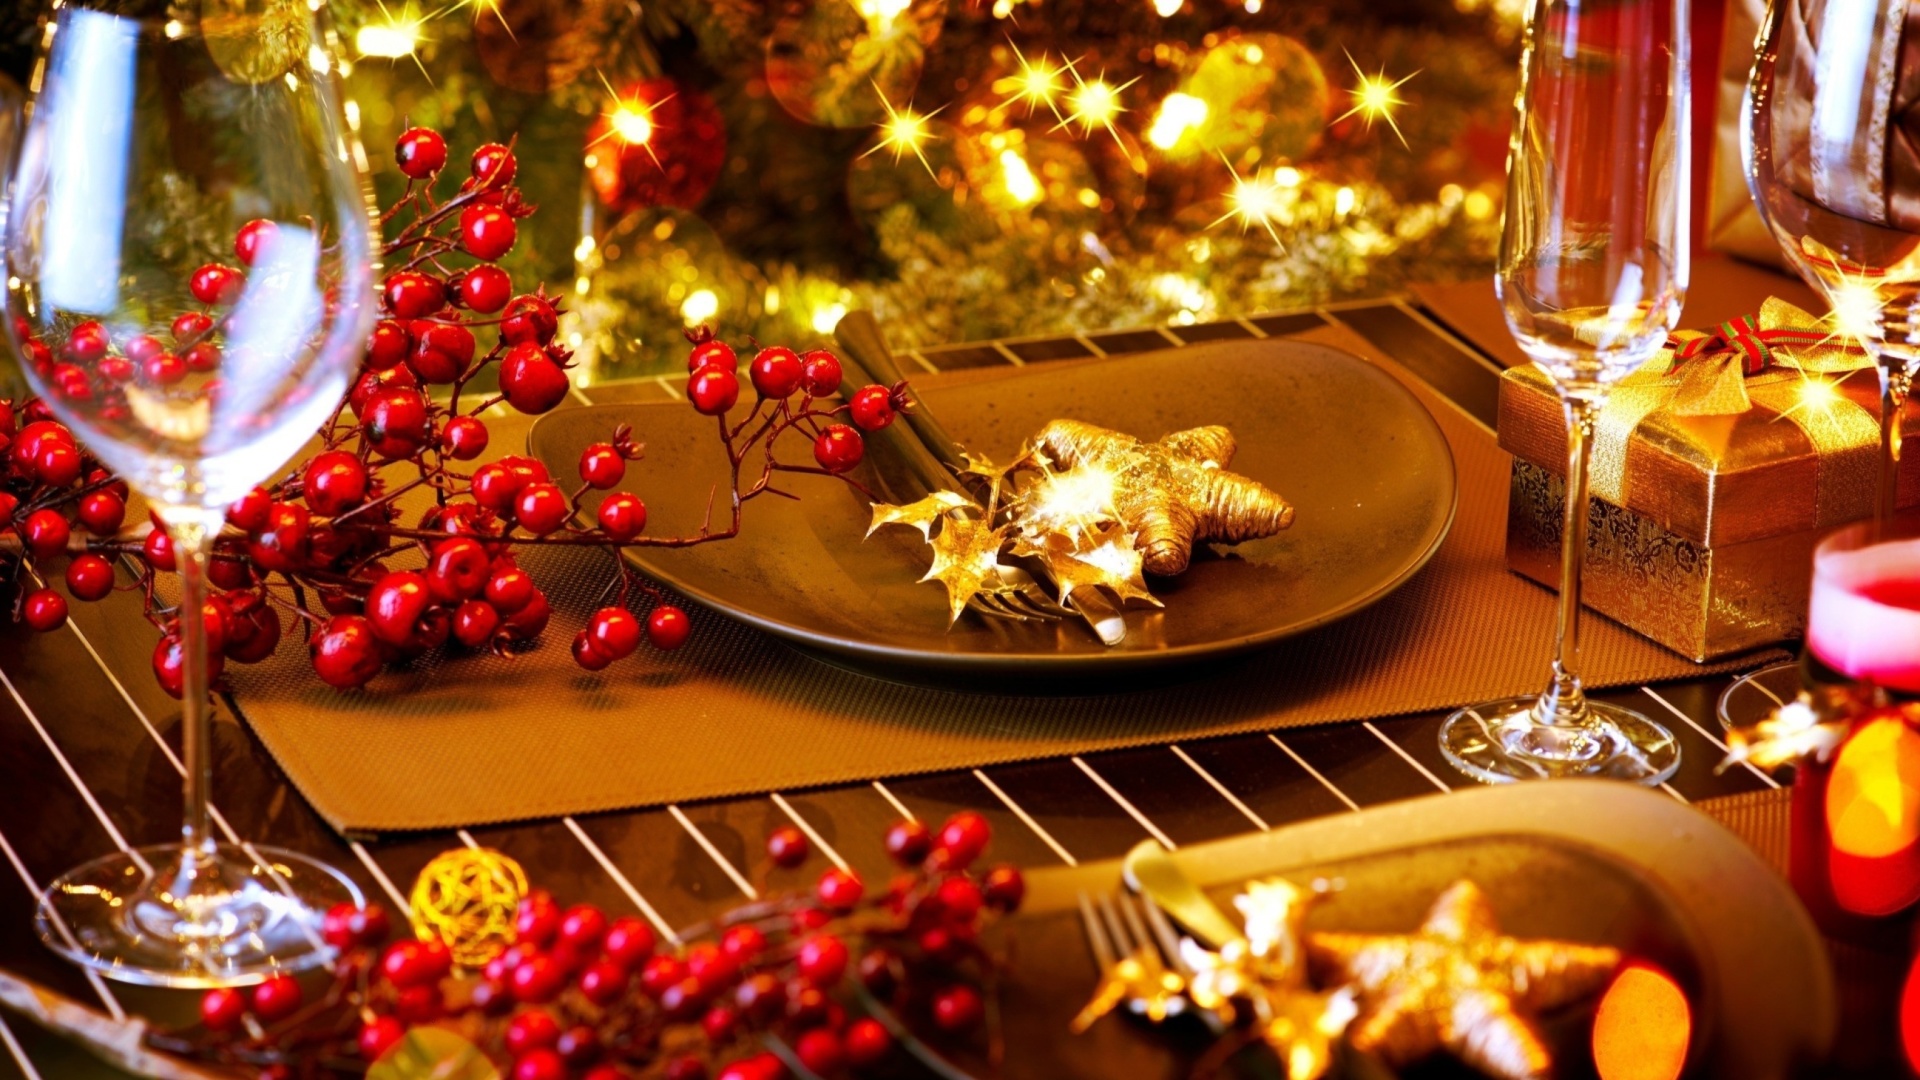 Christmas Table Decorations wallpaper 1920x1080